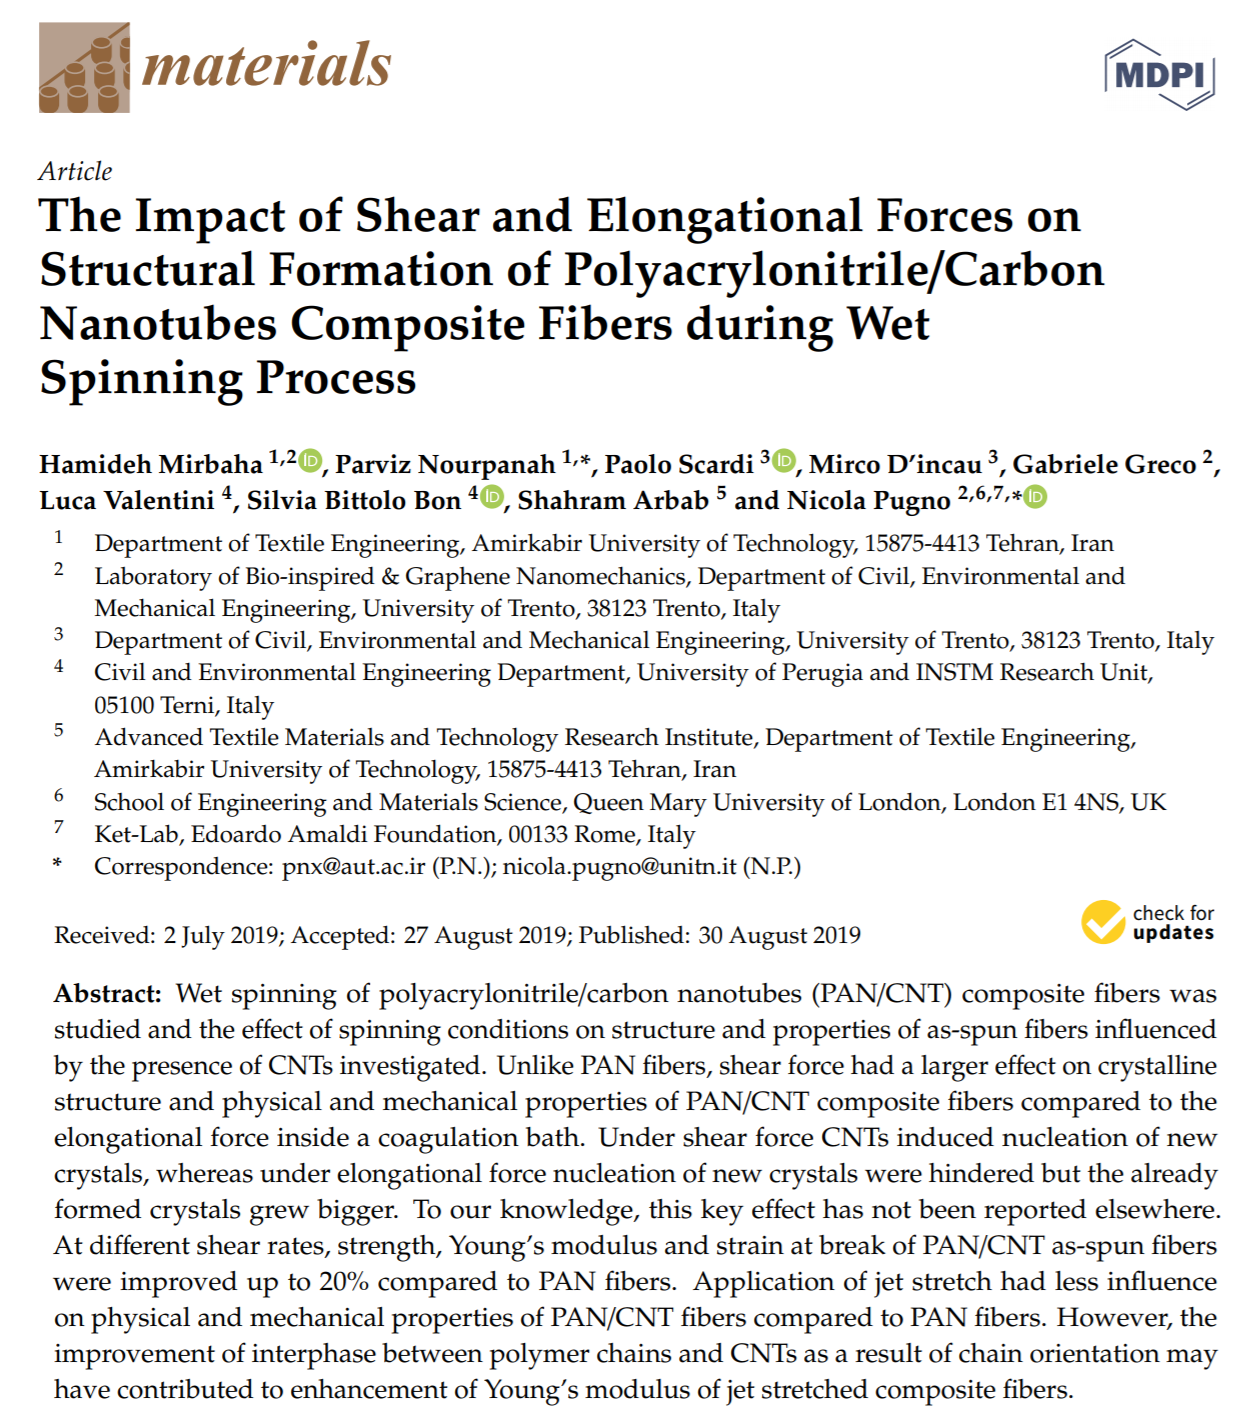 THE IMPACT OF SHEAR AND ELONGATIONAL FORCES